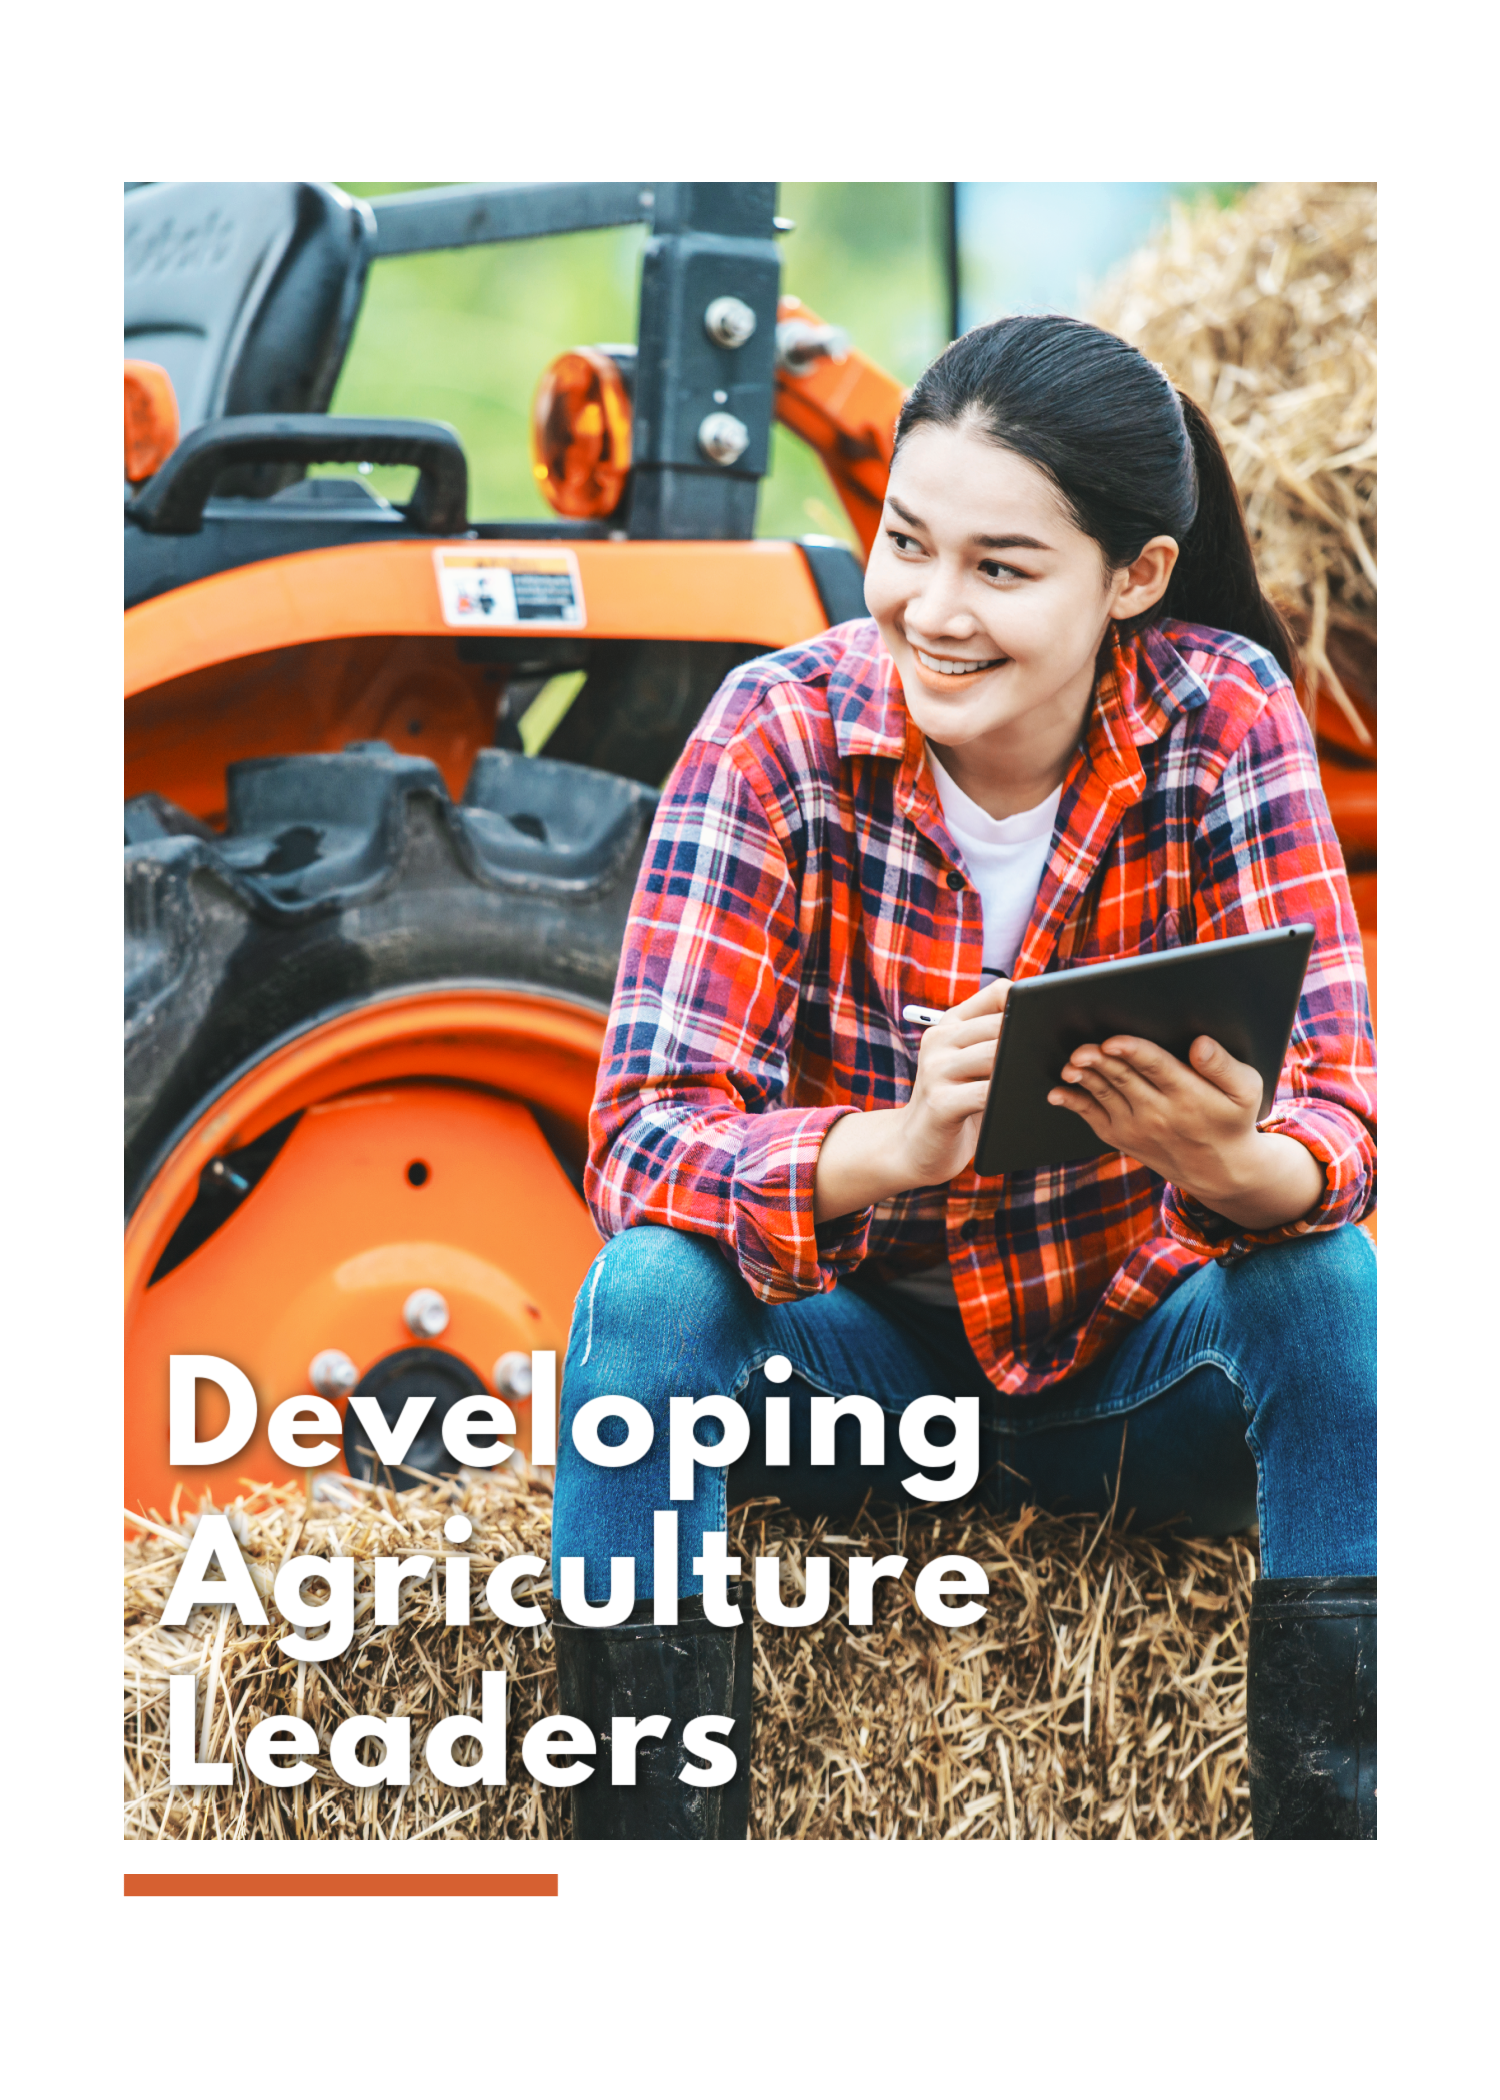 Young woman with iPad sitting on a bale of hay in front of a tractor with text: Developing Agricultural Leaders